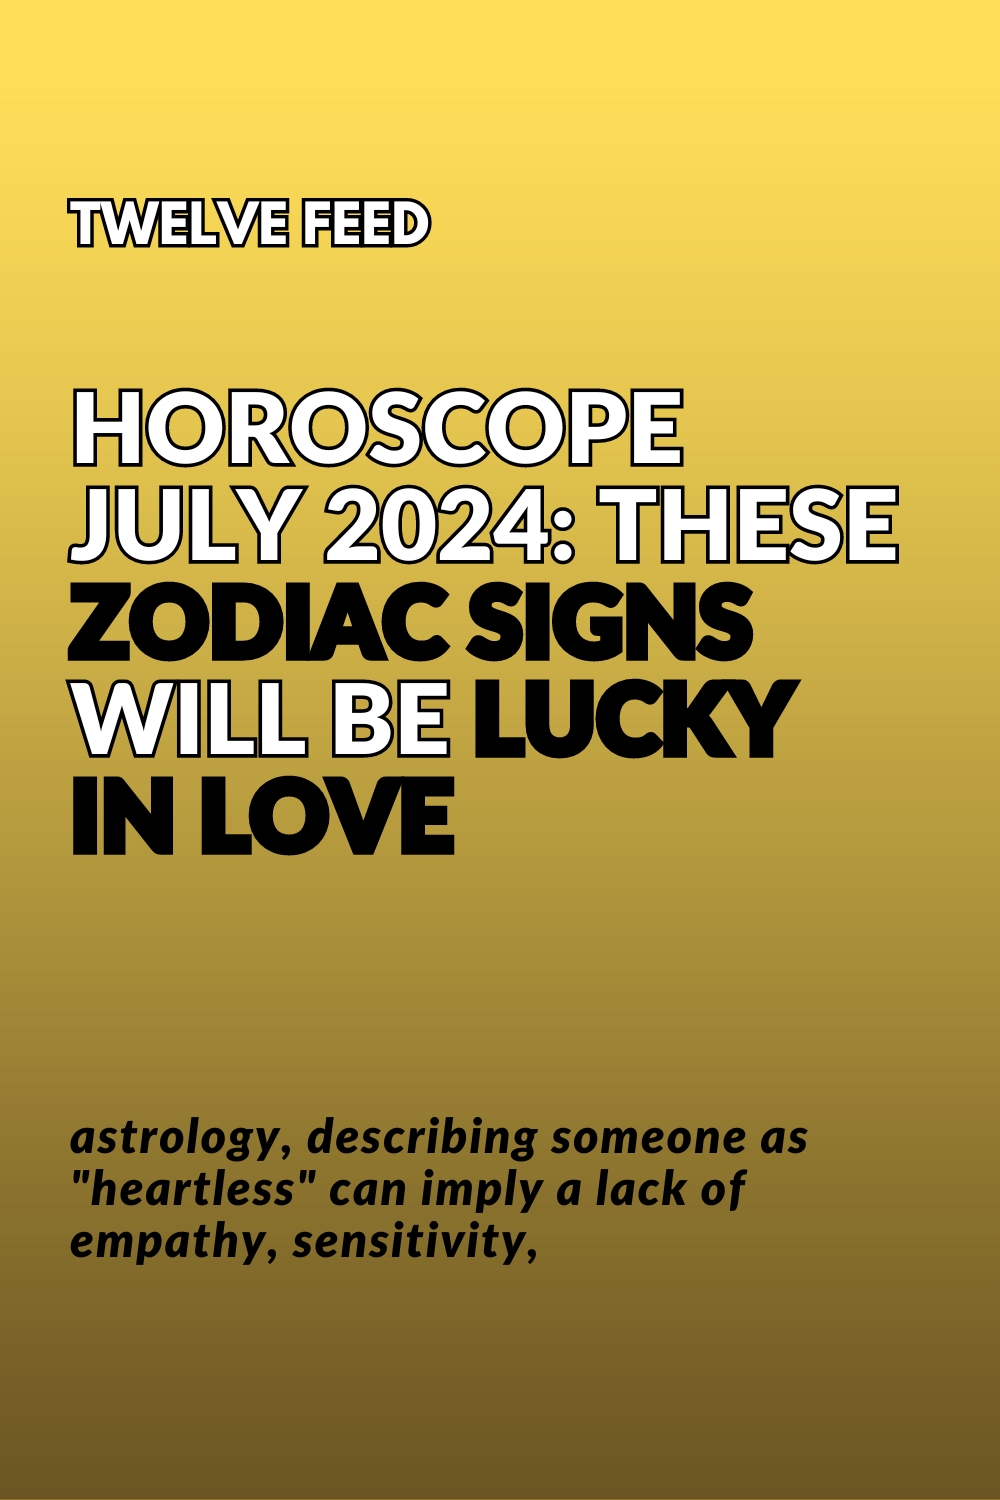 Horoscope July 2024: These Zodiac Signs Will Be Lucky In Love